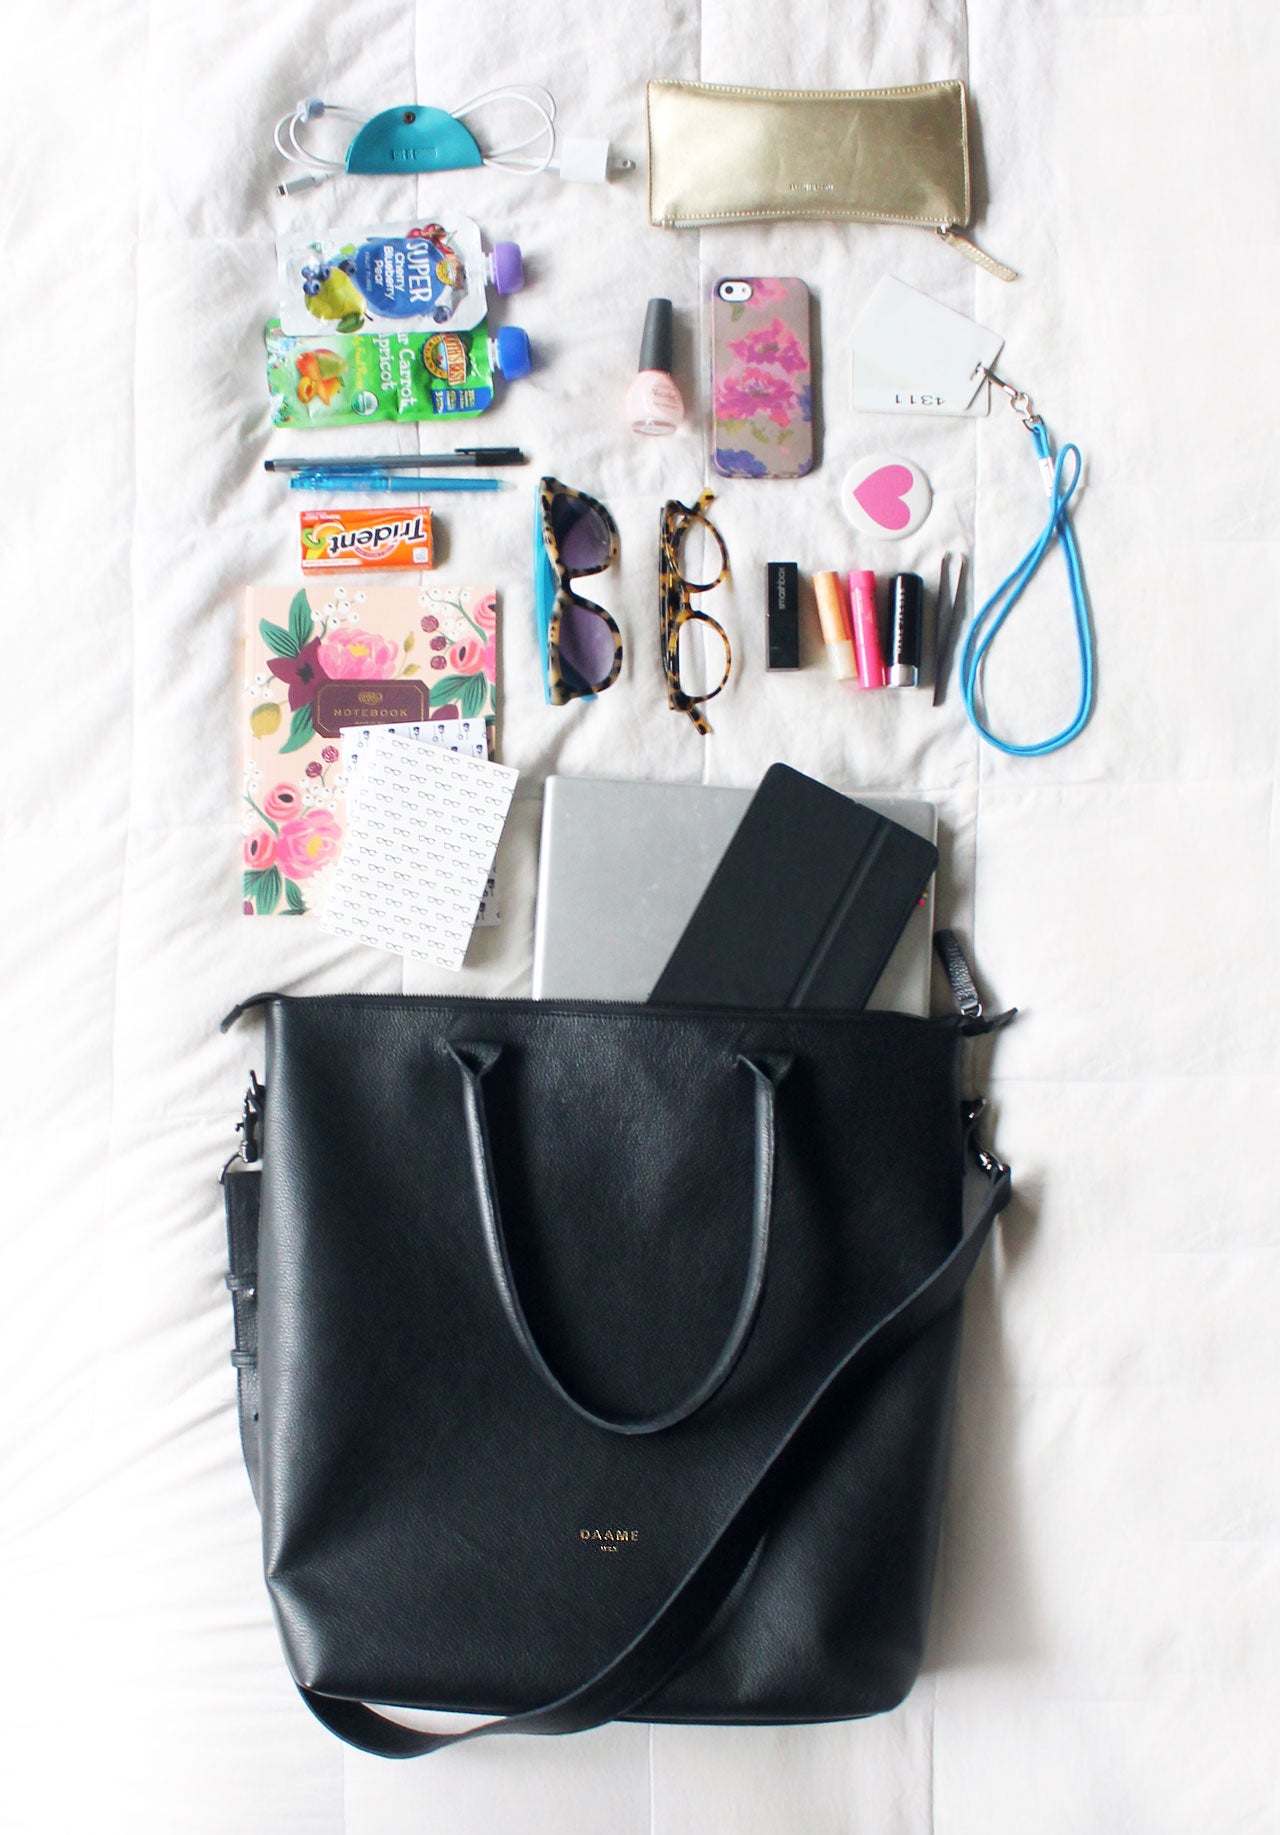 What's inside Daame leather laptop tote